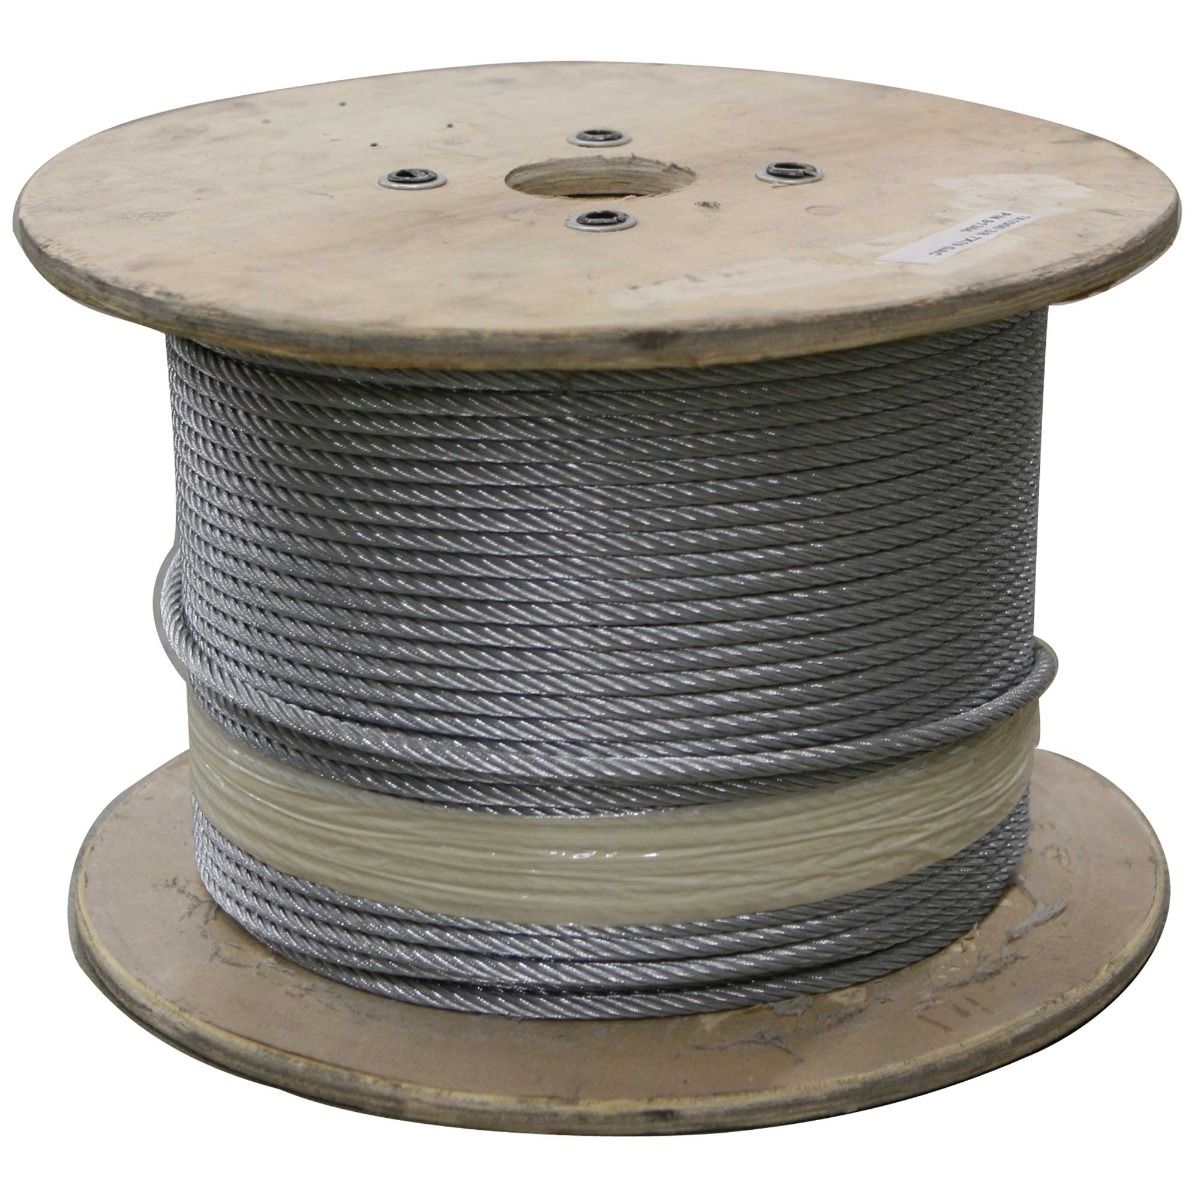 1/8 7x7 Stainless Steel Cable Type 316 Marine Grade 1000ft reel Panorama Cable & Hardware 